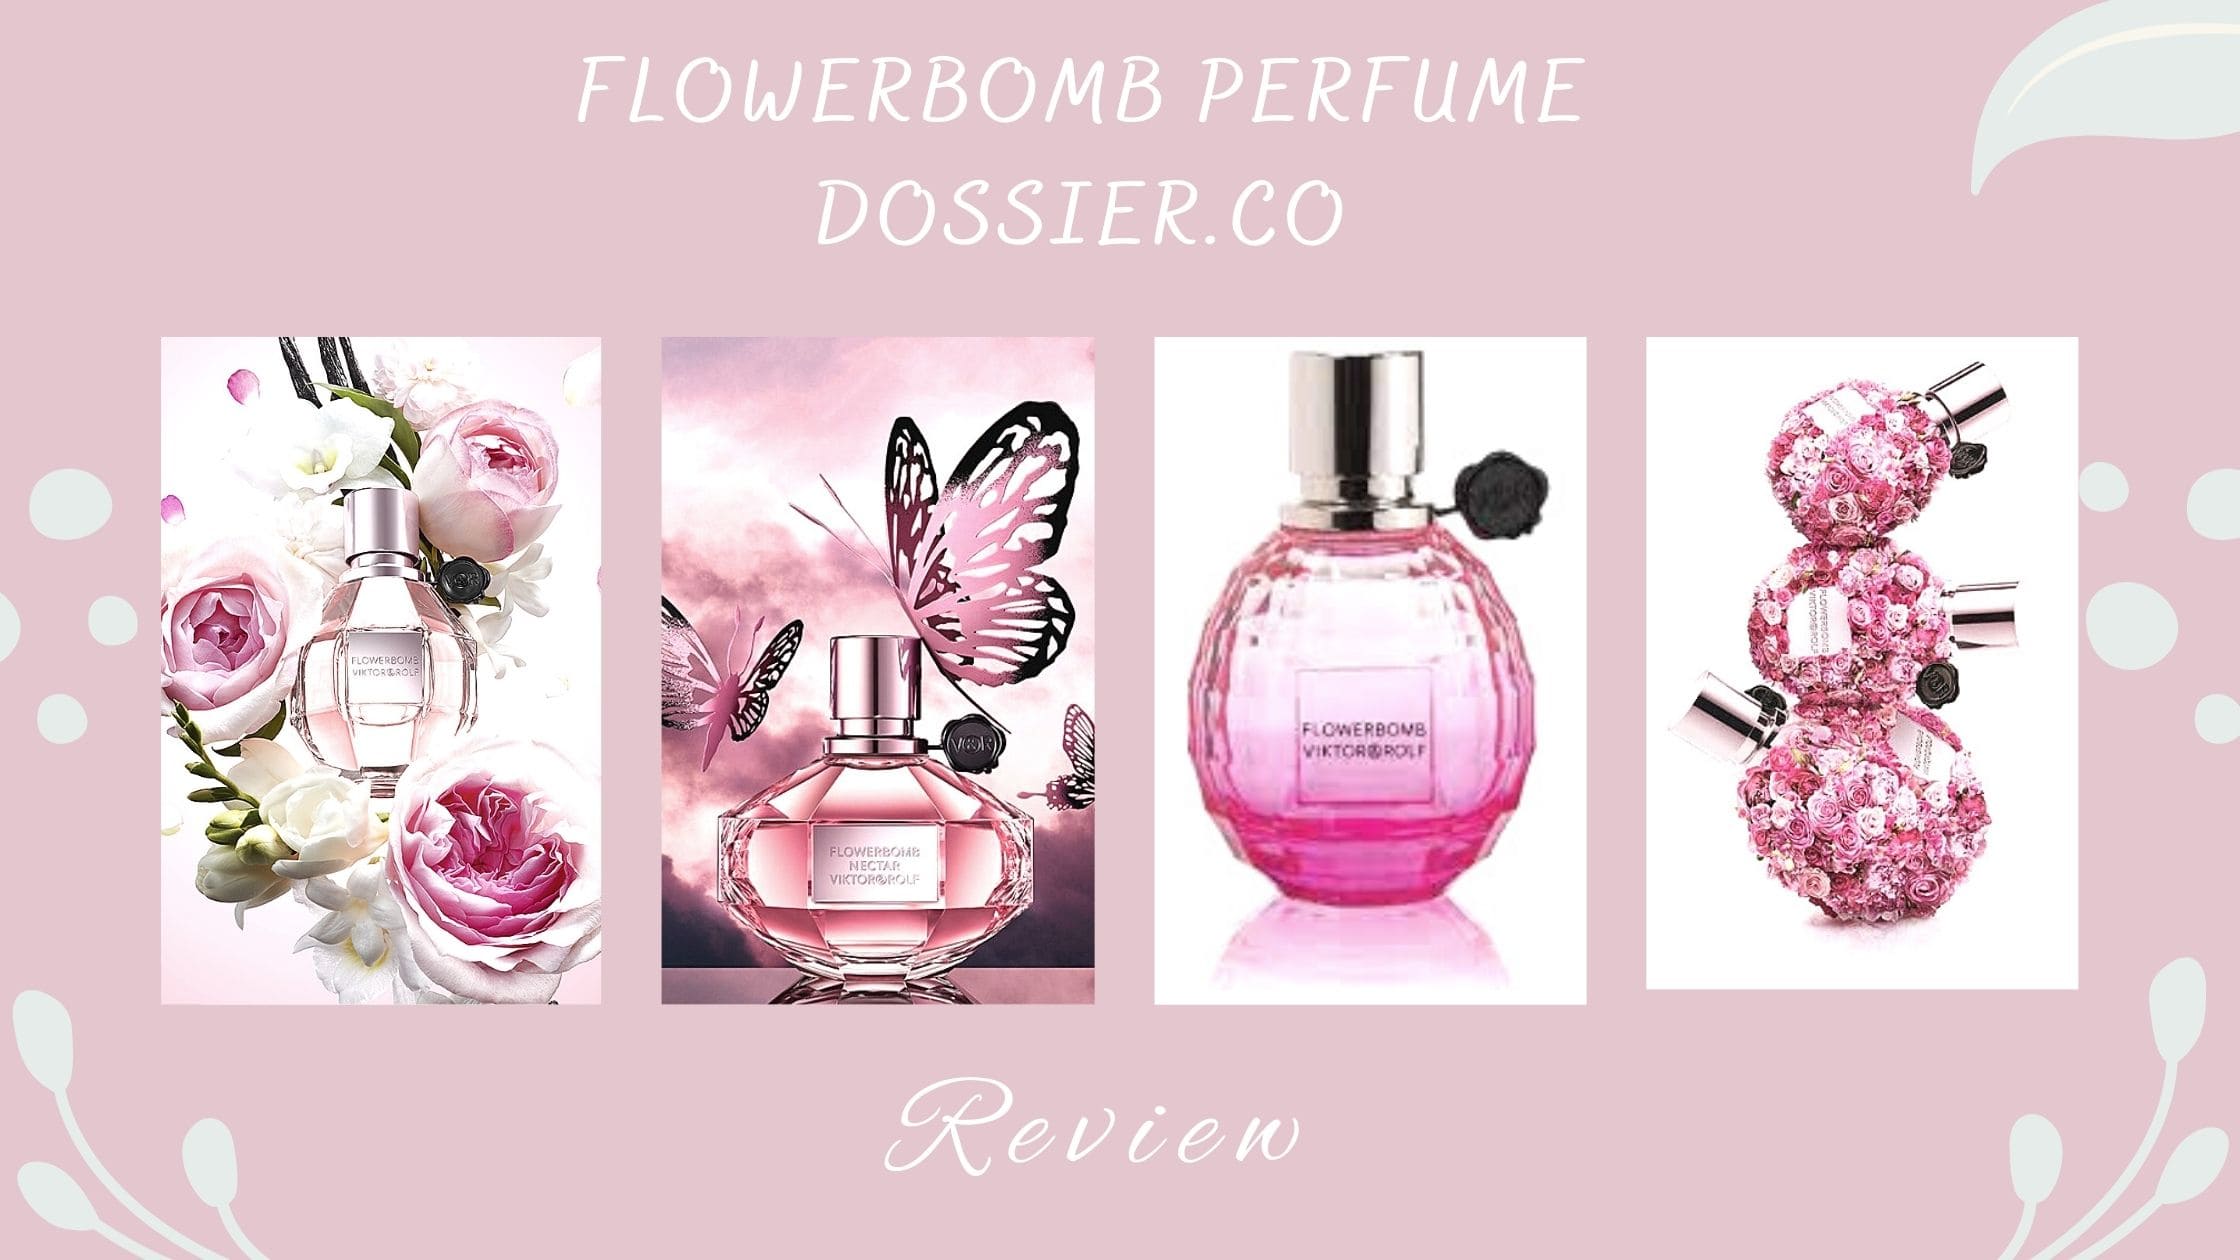 Flowerbomb Perfume Dossier.co-Flowerbomb perfume review